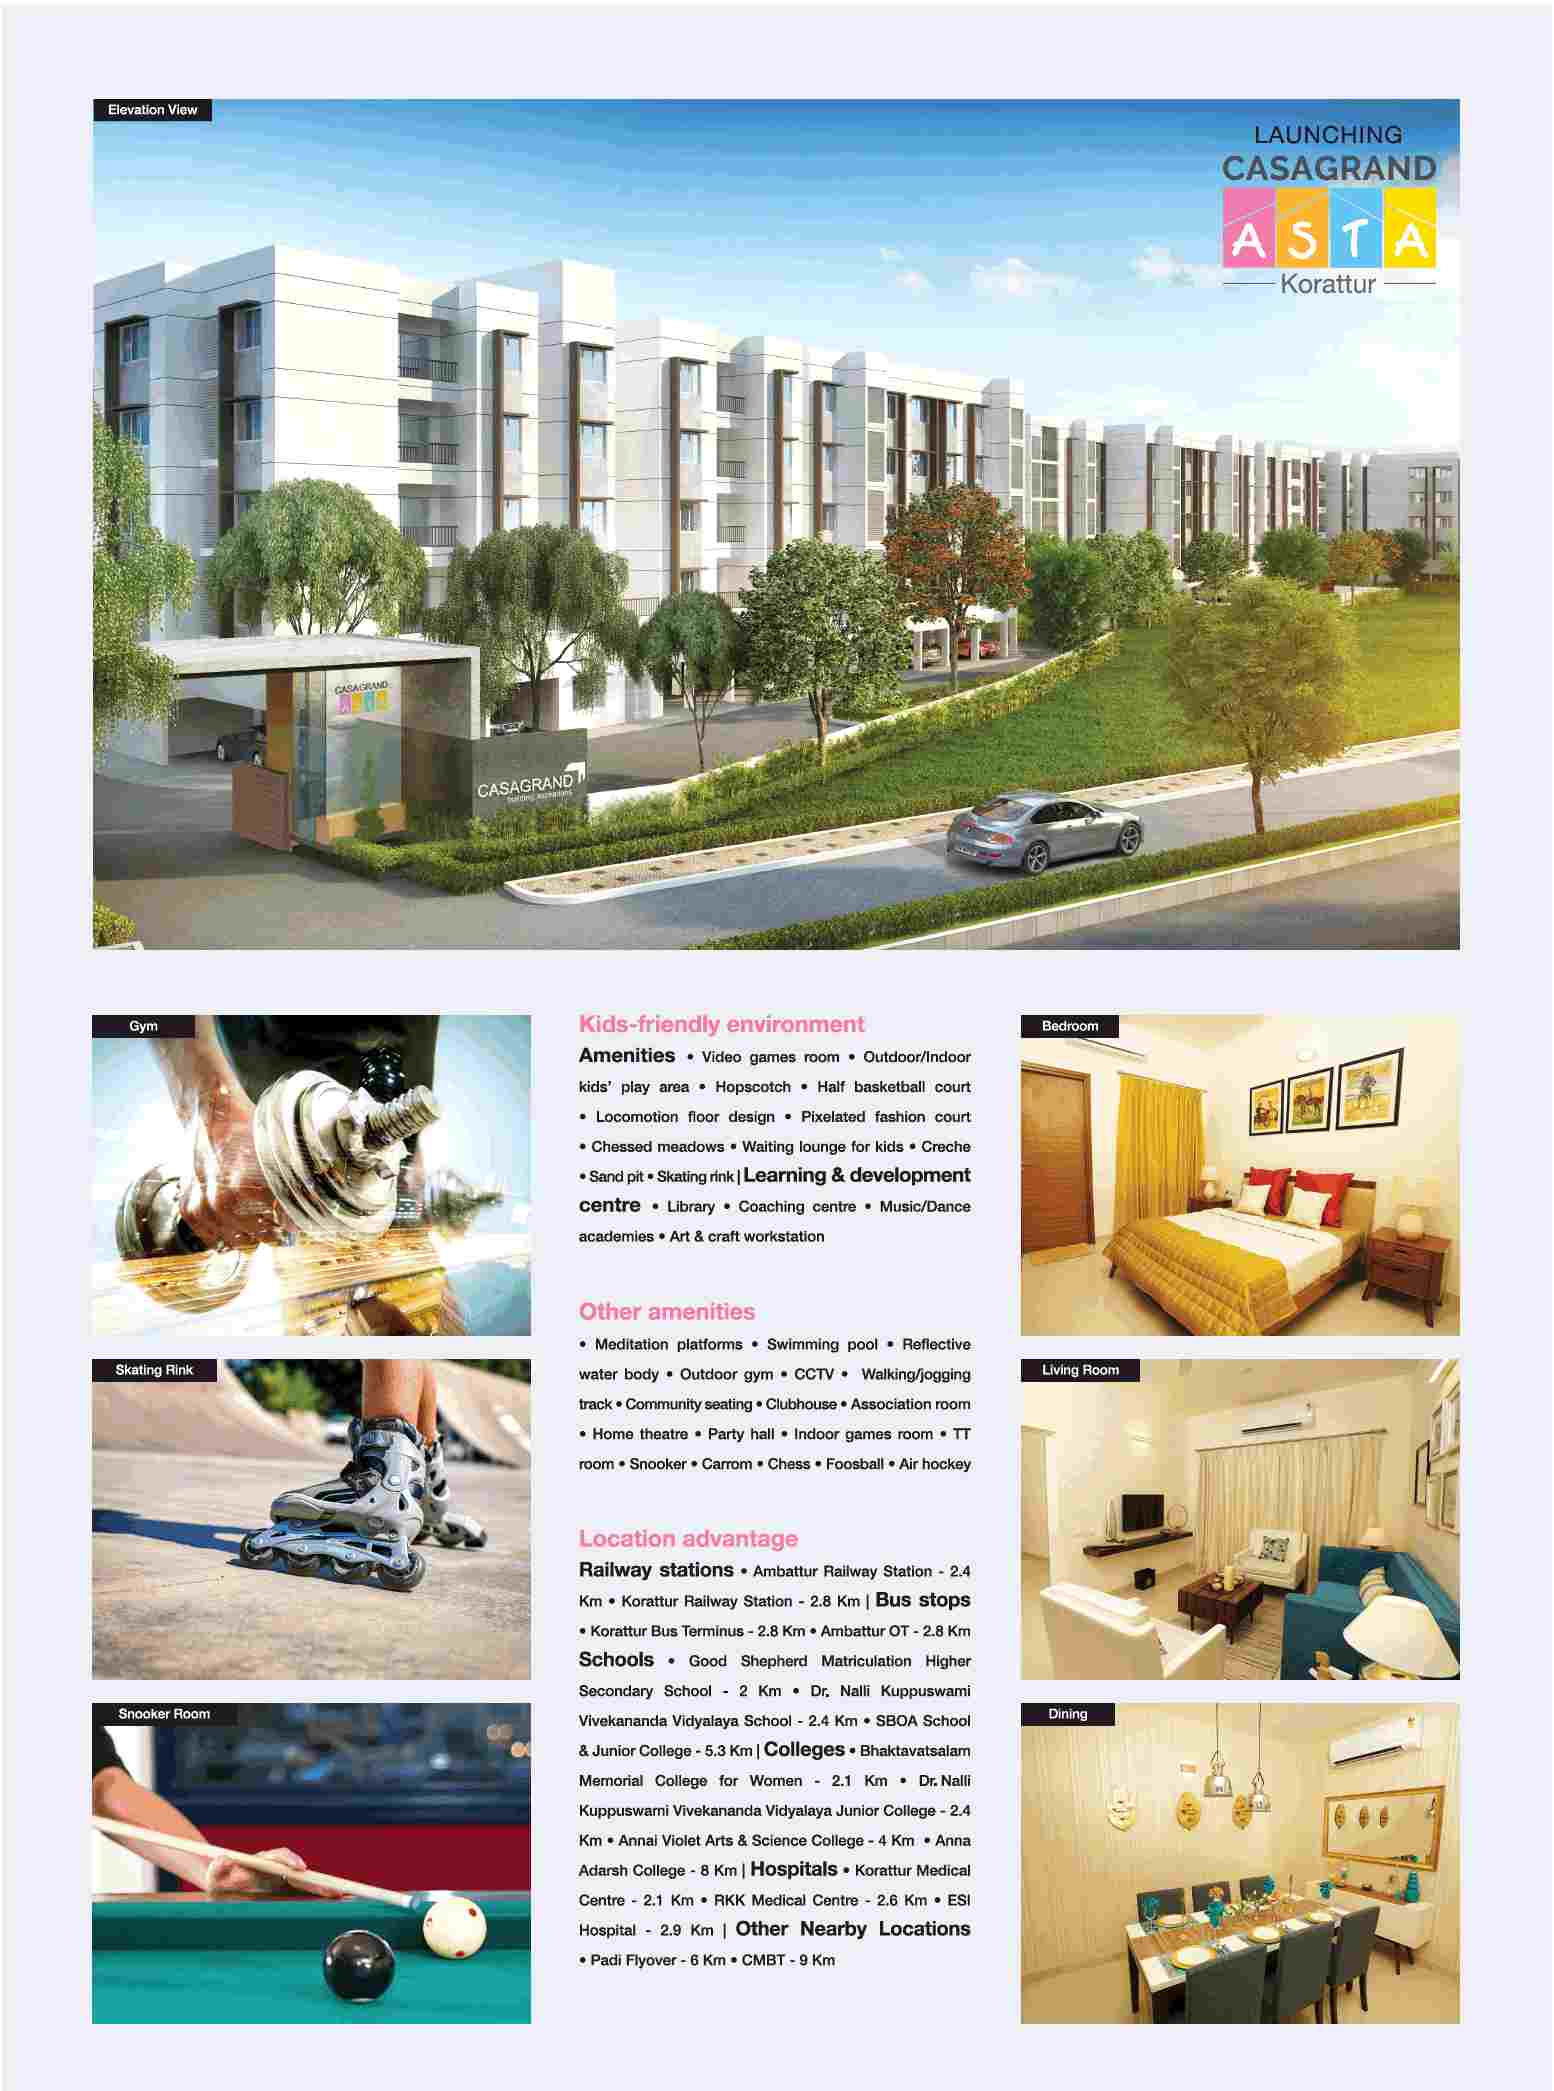 Live in Casagrand Asta and experience the world-class amenities in Chennai Update